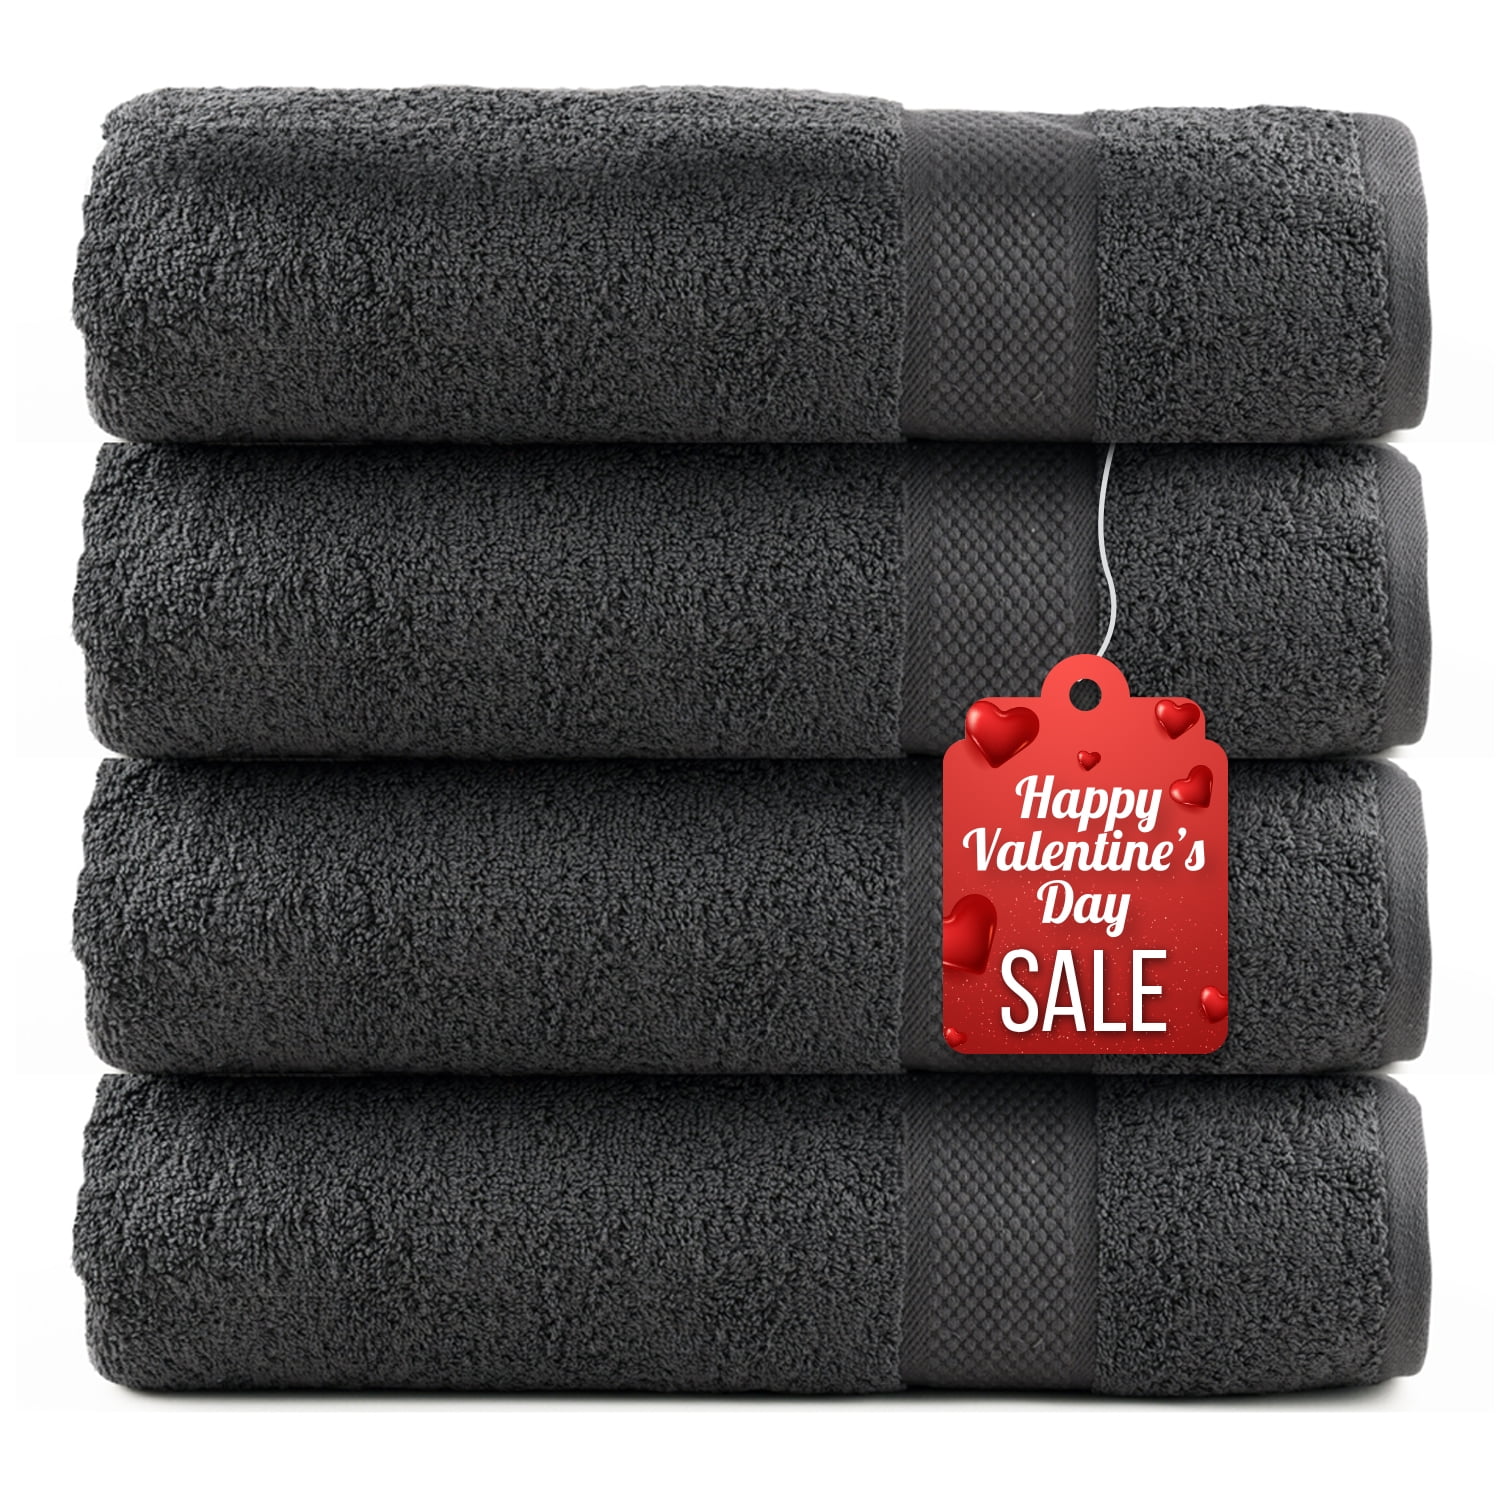 4 Pack Concetti Di-Lusso Olvia Cotton Luxury Towels.27 x 55 in 20 x 35 in 